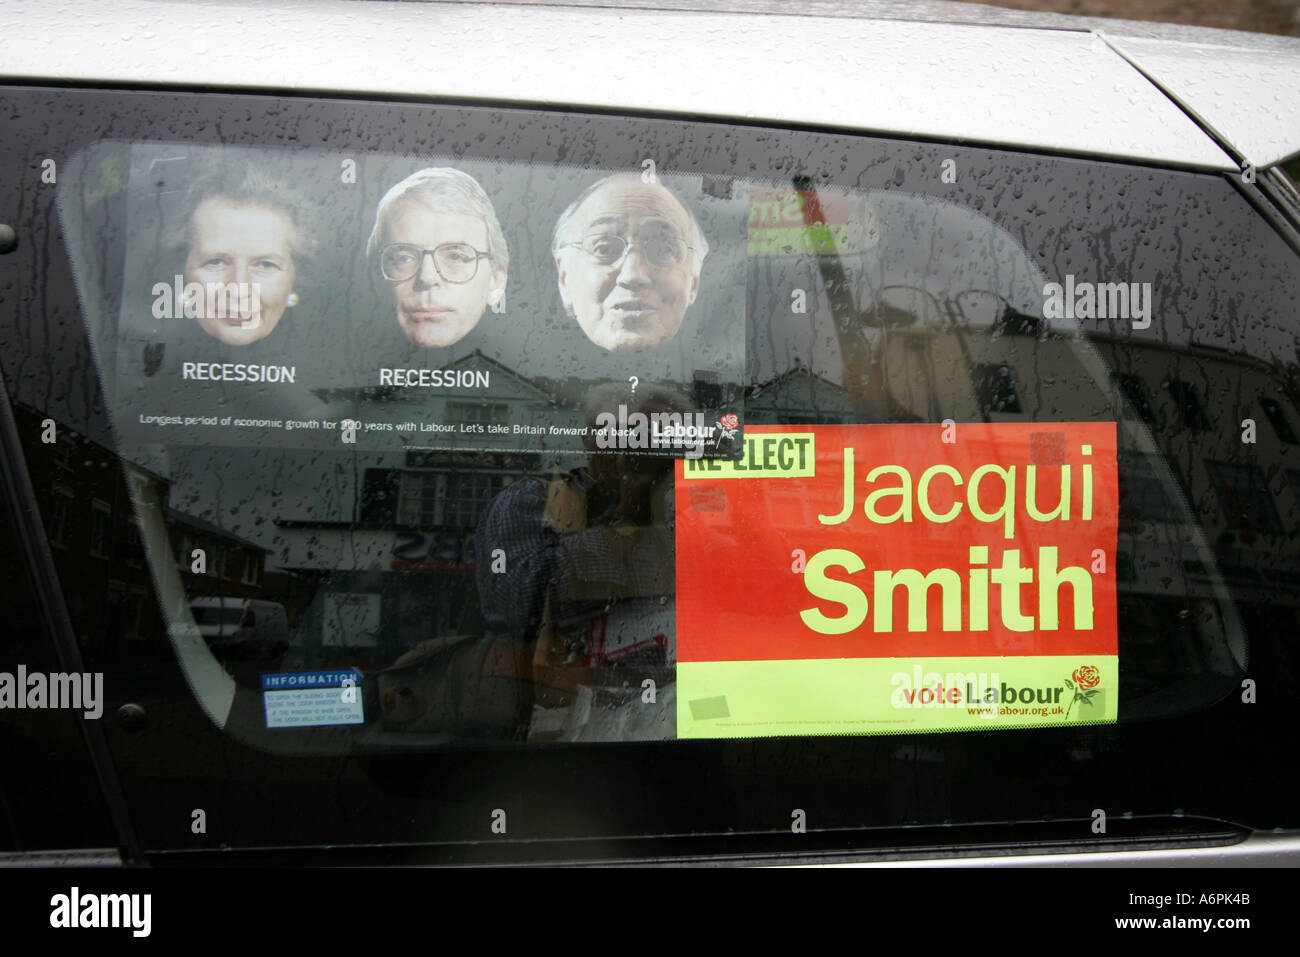 Election pamphlet for Jacqui Smith in the window of a car in Redditch Worcestershire during the 2005 general election England UK Stock Photo